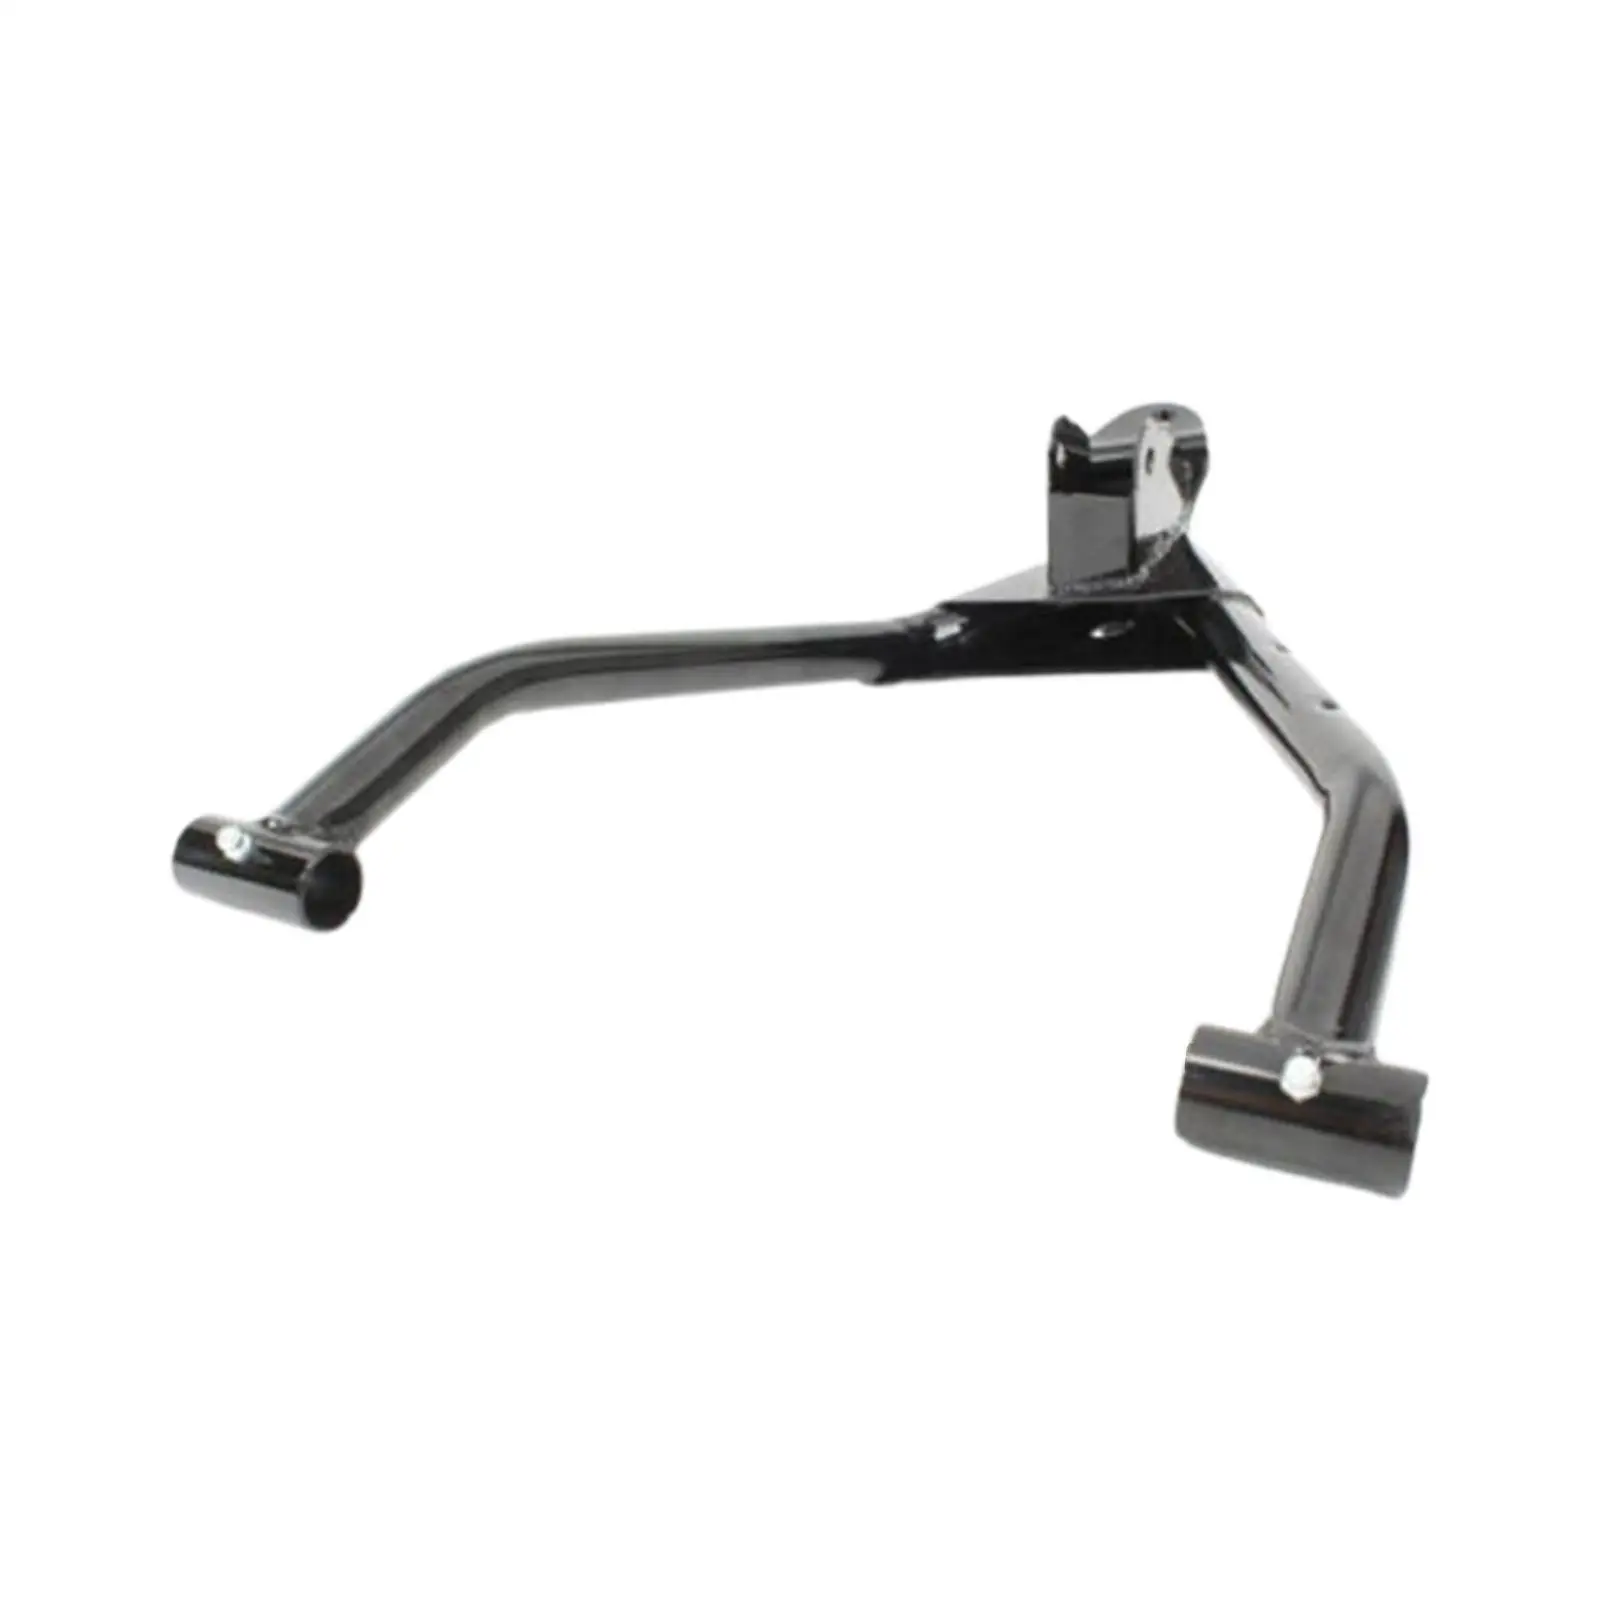 Front Control Arm replacements for RZR 170 ATV Spare Parts Black